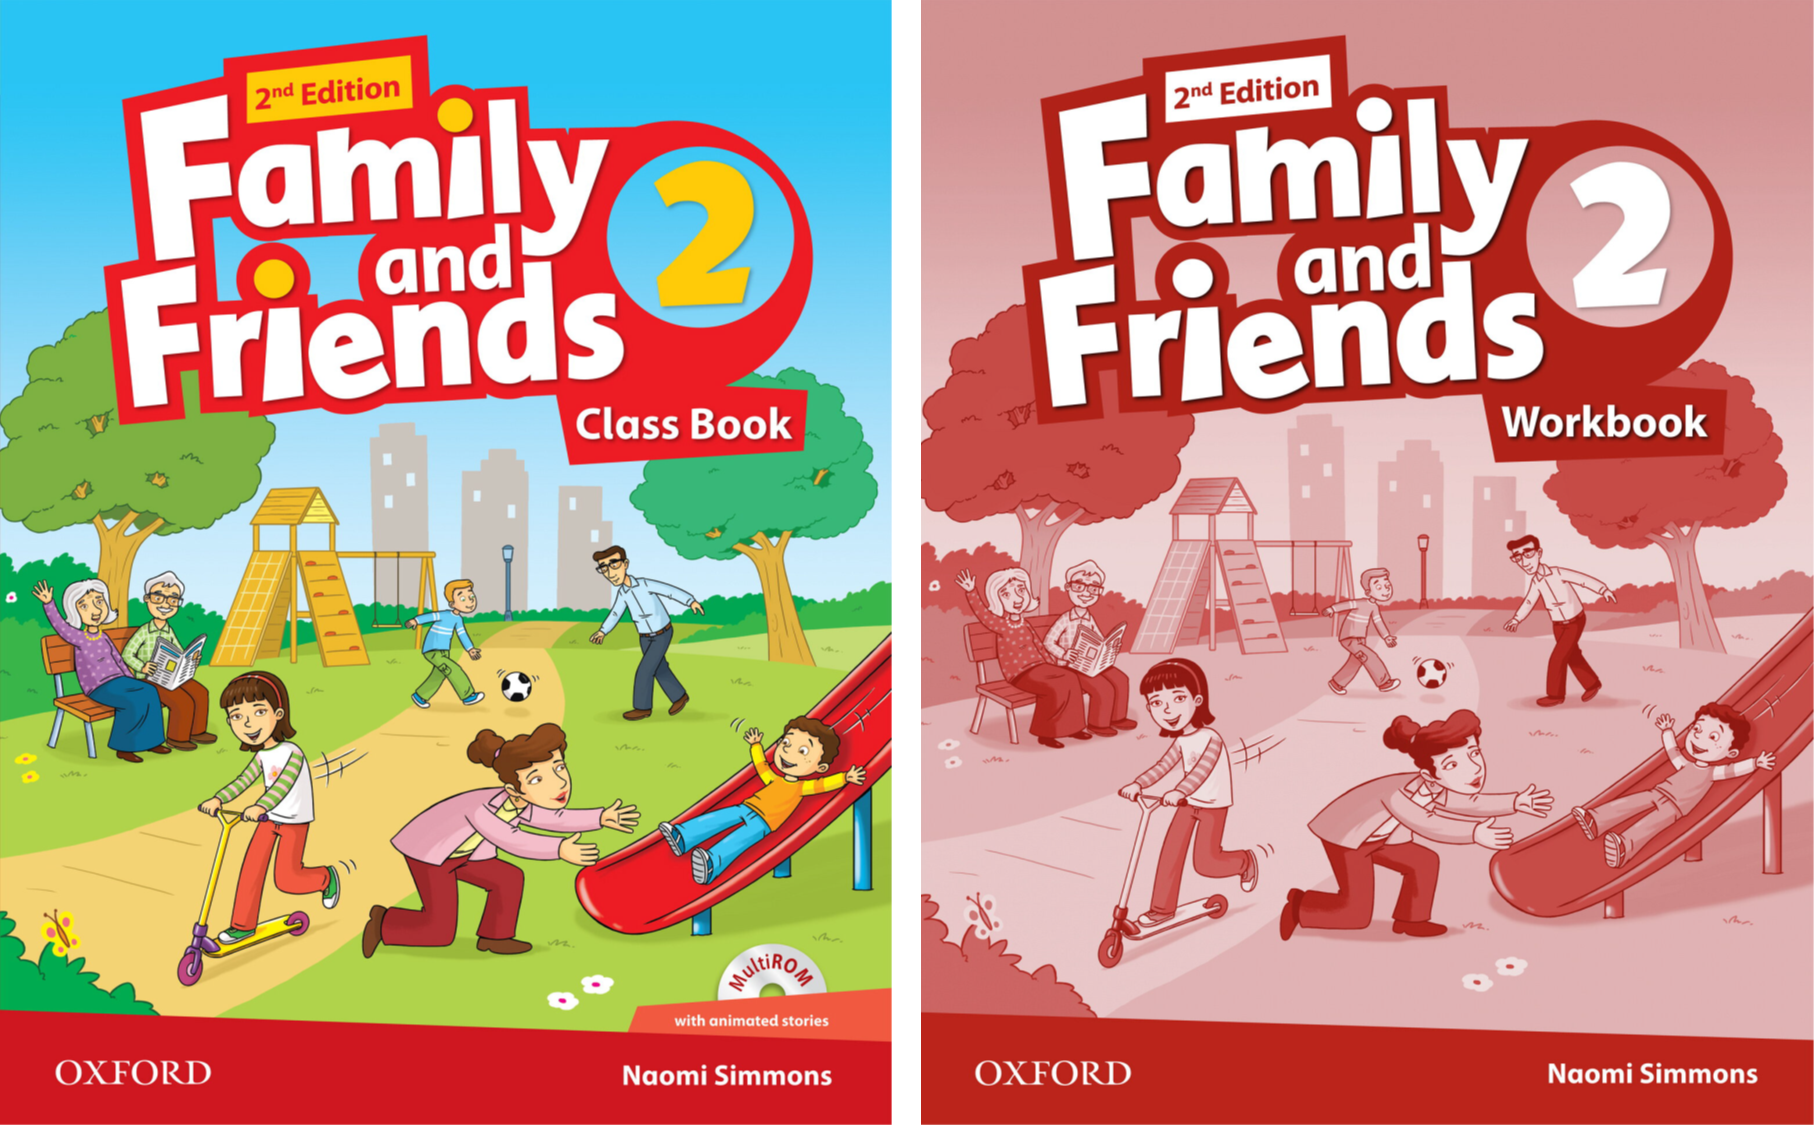 My friend two years. Английский язык Family and friends class book 2. Книга Family and friends 2. Английский Family and friends 2 class book. Family and friends 2 (2nd Edition) комплект.